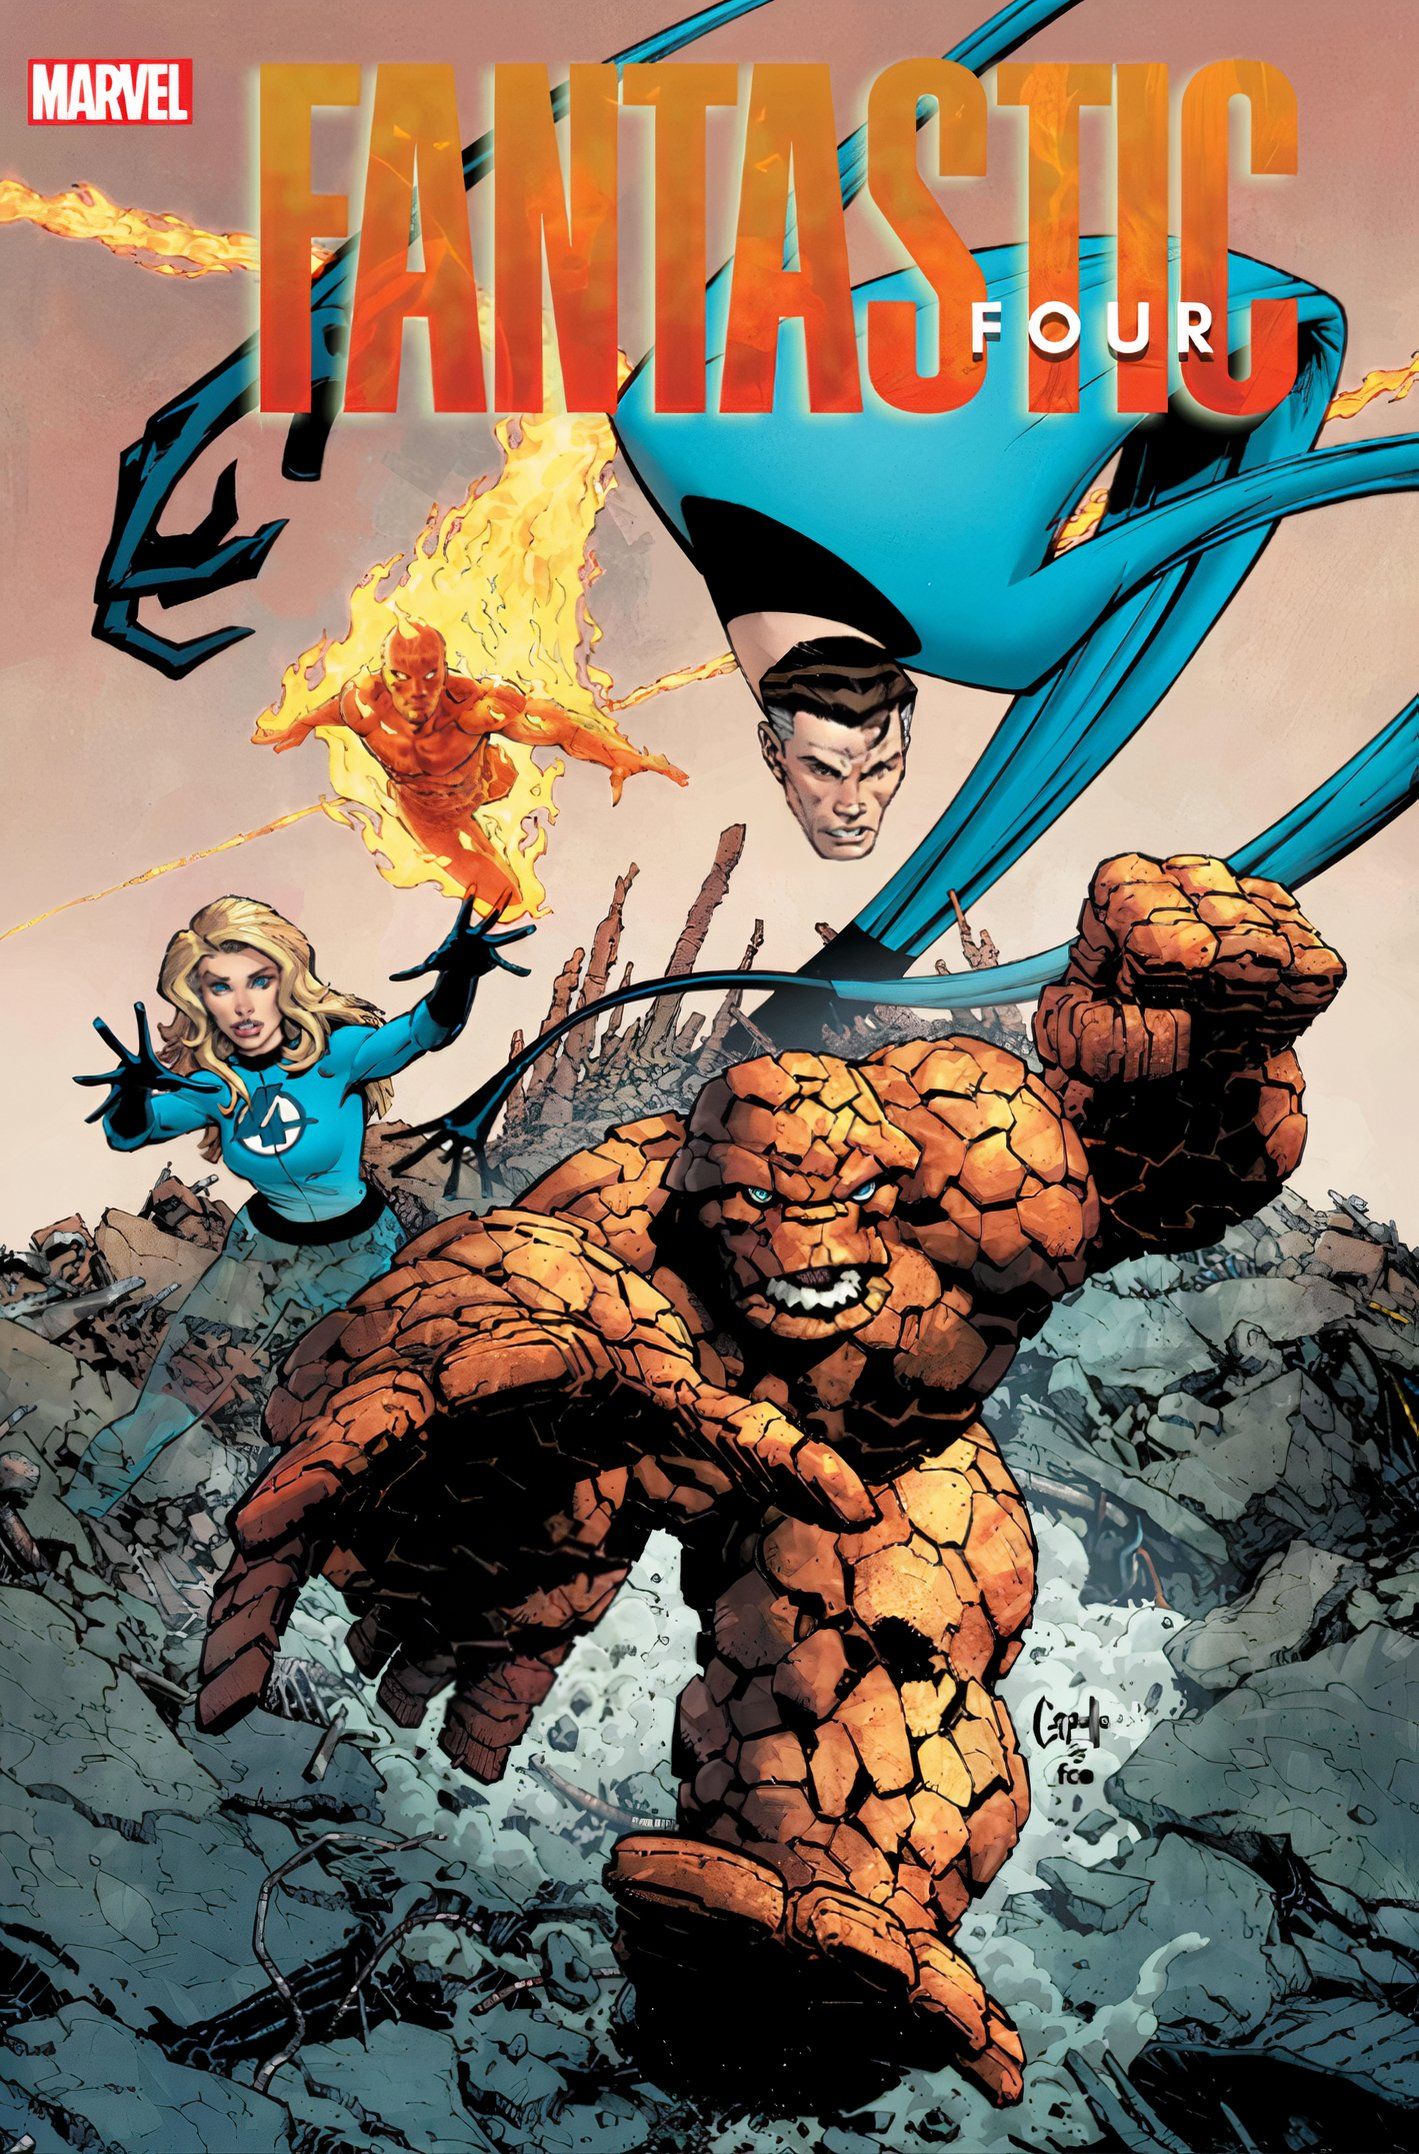 Fantastic Four #25, alternate cover, the team races through a rubble-strewn alien world in action